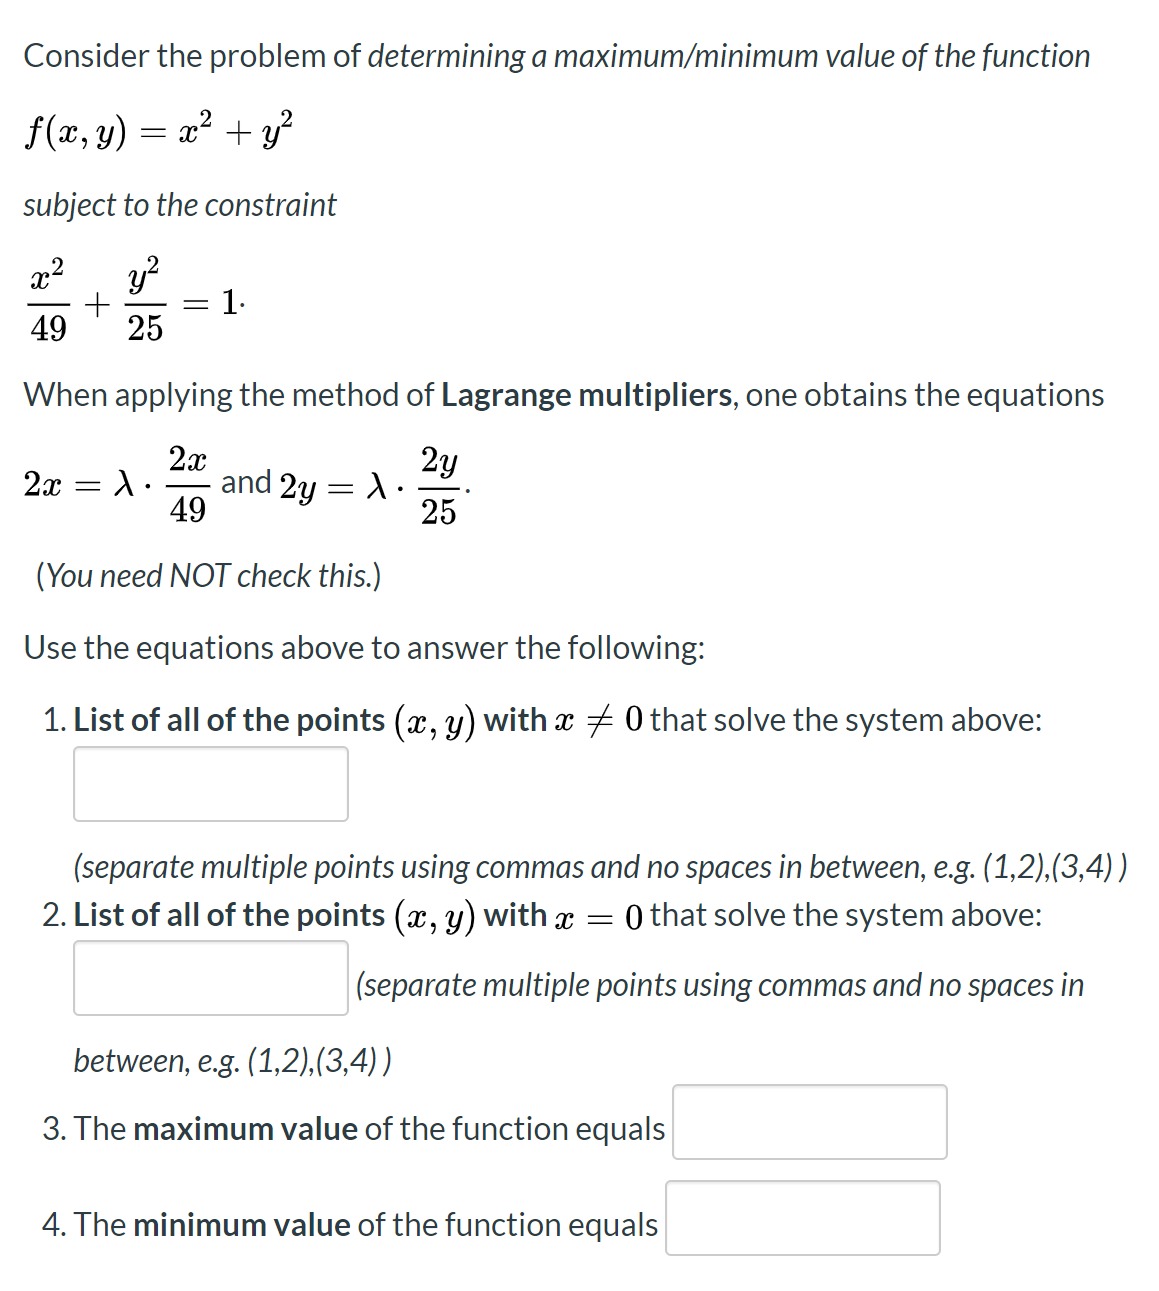 Consider the problem of determining a maximum/minimum value of the function
f(x, y) = x? + y?
subject to the constraint
x²
1.
49
25
When applying the method of Lagrange multipliers, one obtains the equations
2x
and 2y
49
2y
2x = A.
25
(You need NOT check this.)
Use the equations above to answer the following:
1. List of all of the points (x, y) with x + 0 that solve the system above:
(separate multiple points using commas and no spaces in between, e.g. (1,2),(3,4))
2. List of all of the points (x, y) with x =
0 that solve the system above:
|(separate multiple points using commas and no spaces in
between, e.g. (1,2),(3,4))
3. The maximum value of the function equals
4. The minimum value of the function equals
